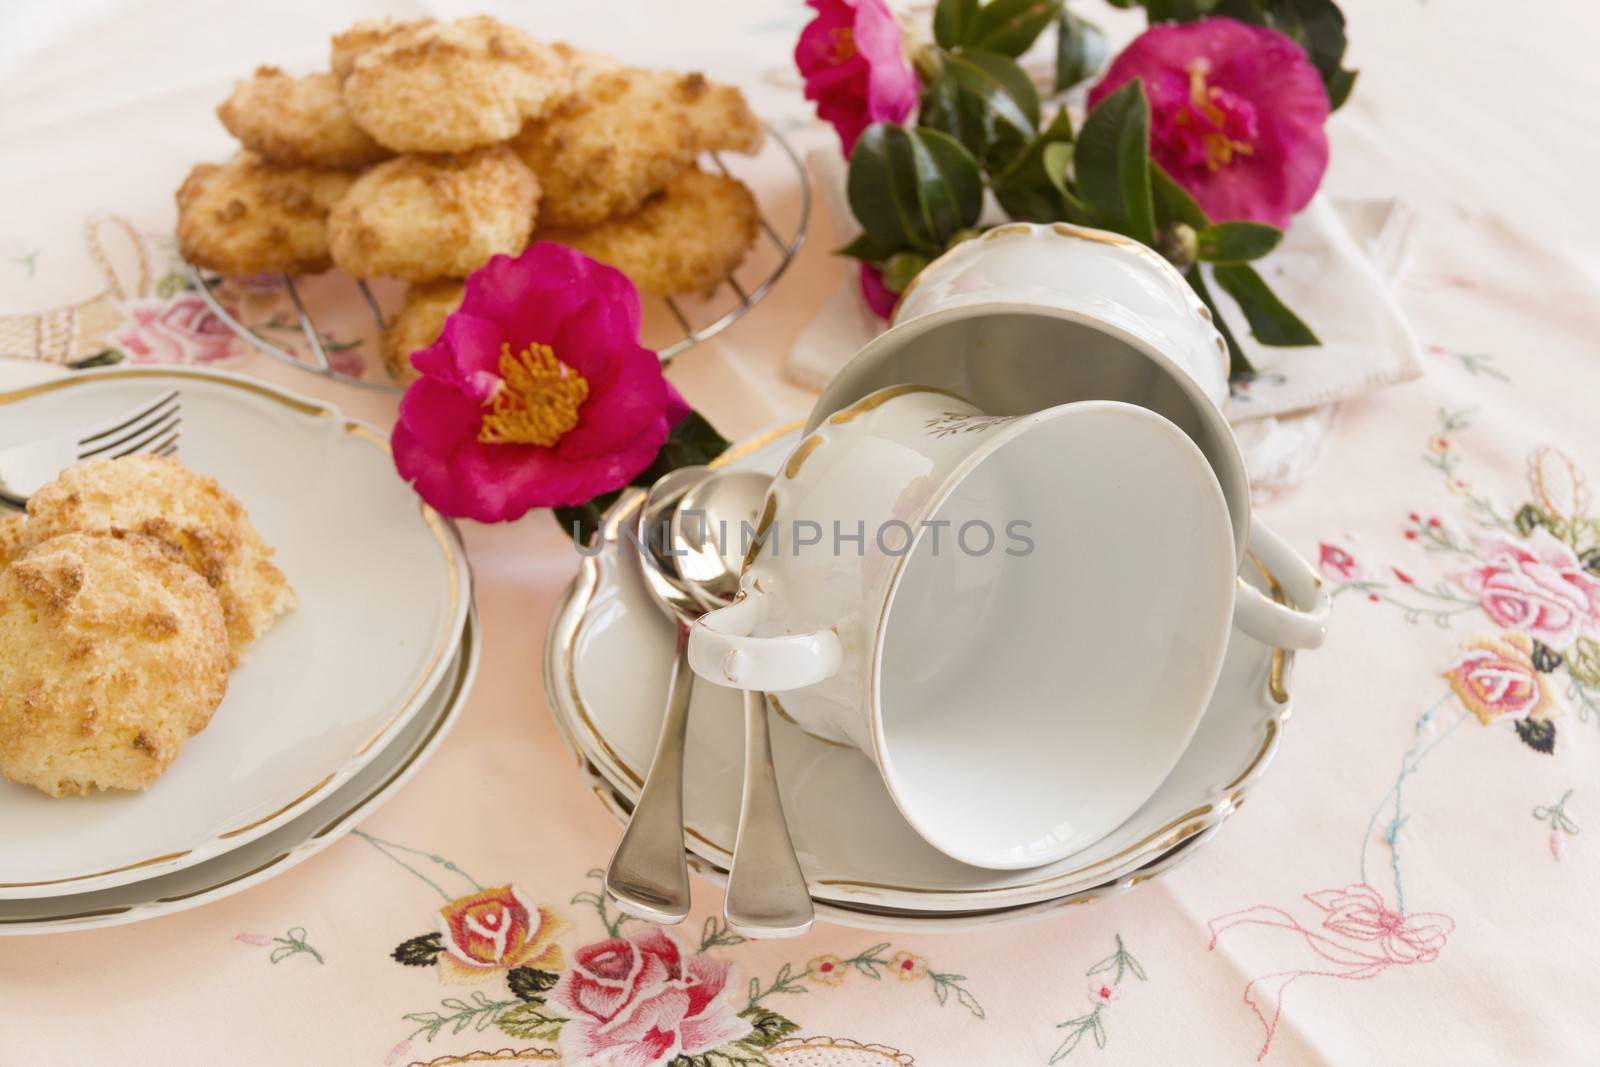 Camellias Biscuits And Teacups by jabiru